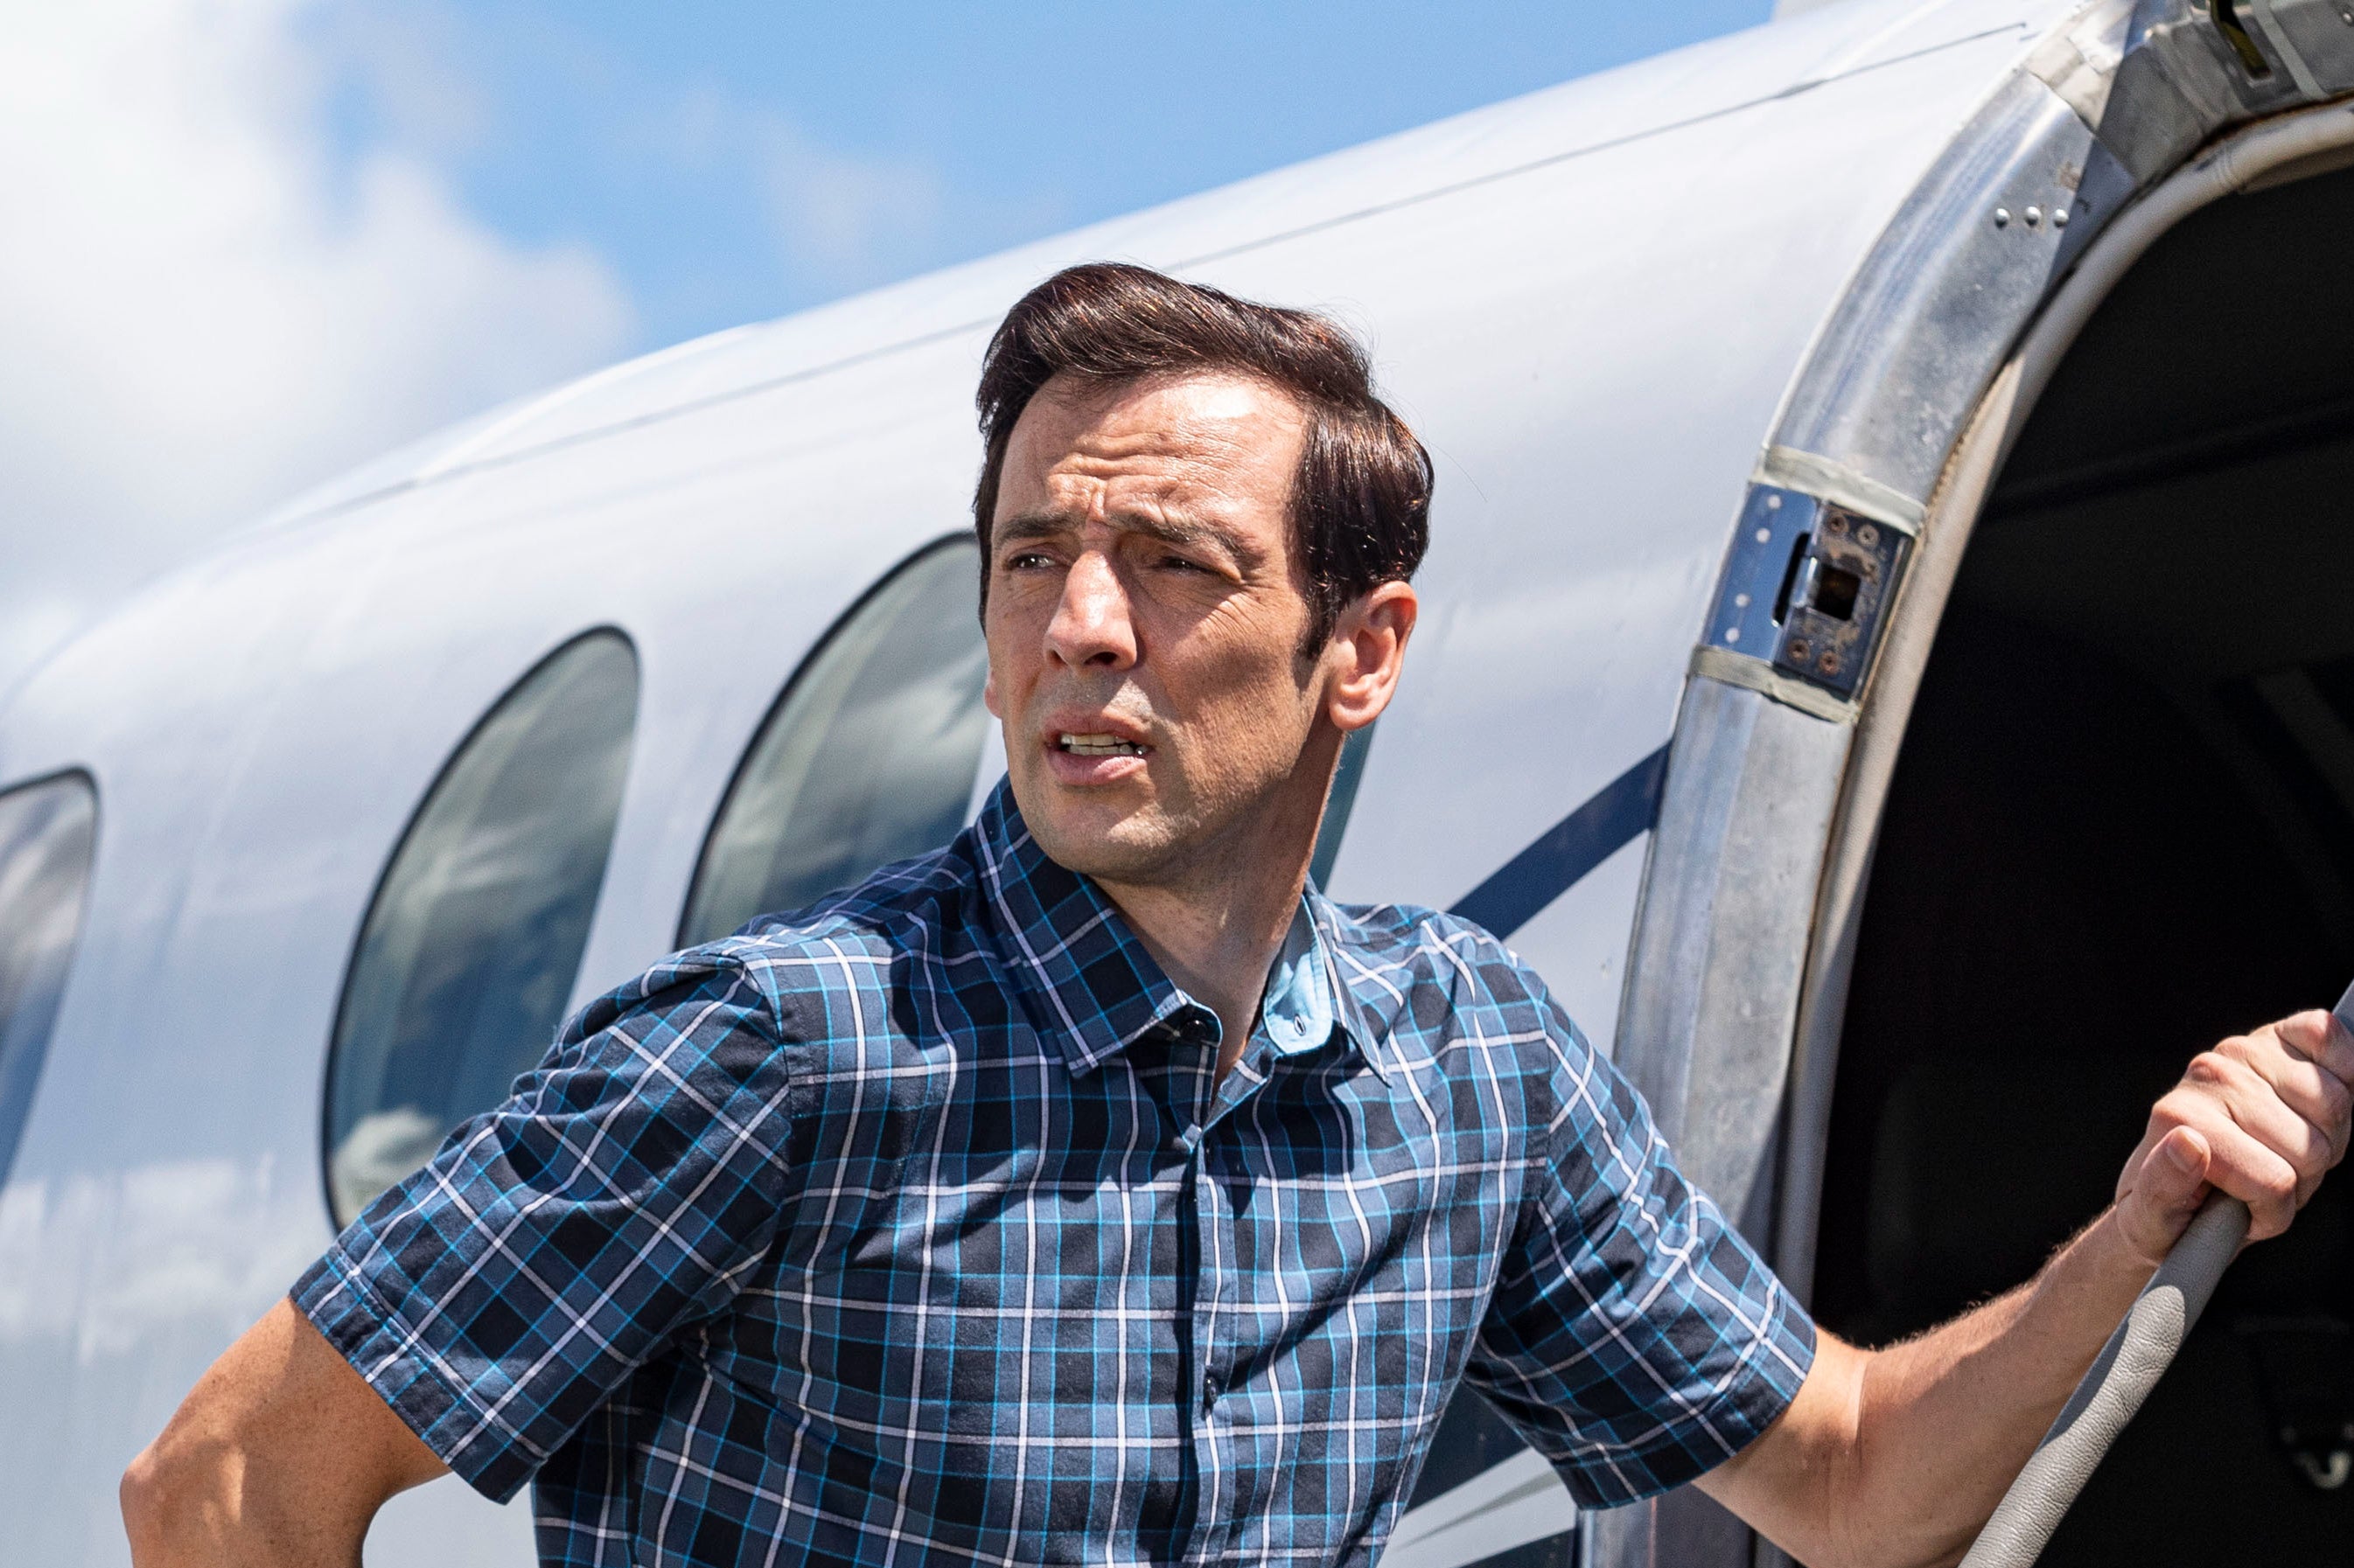 Ralf Little in his final season of ‘Death in Paradise’